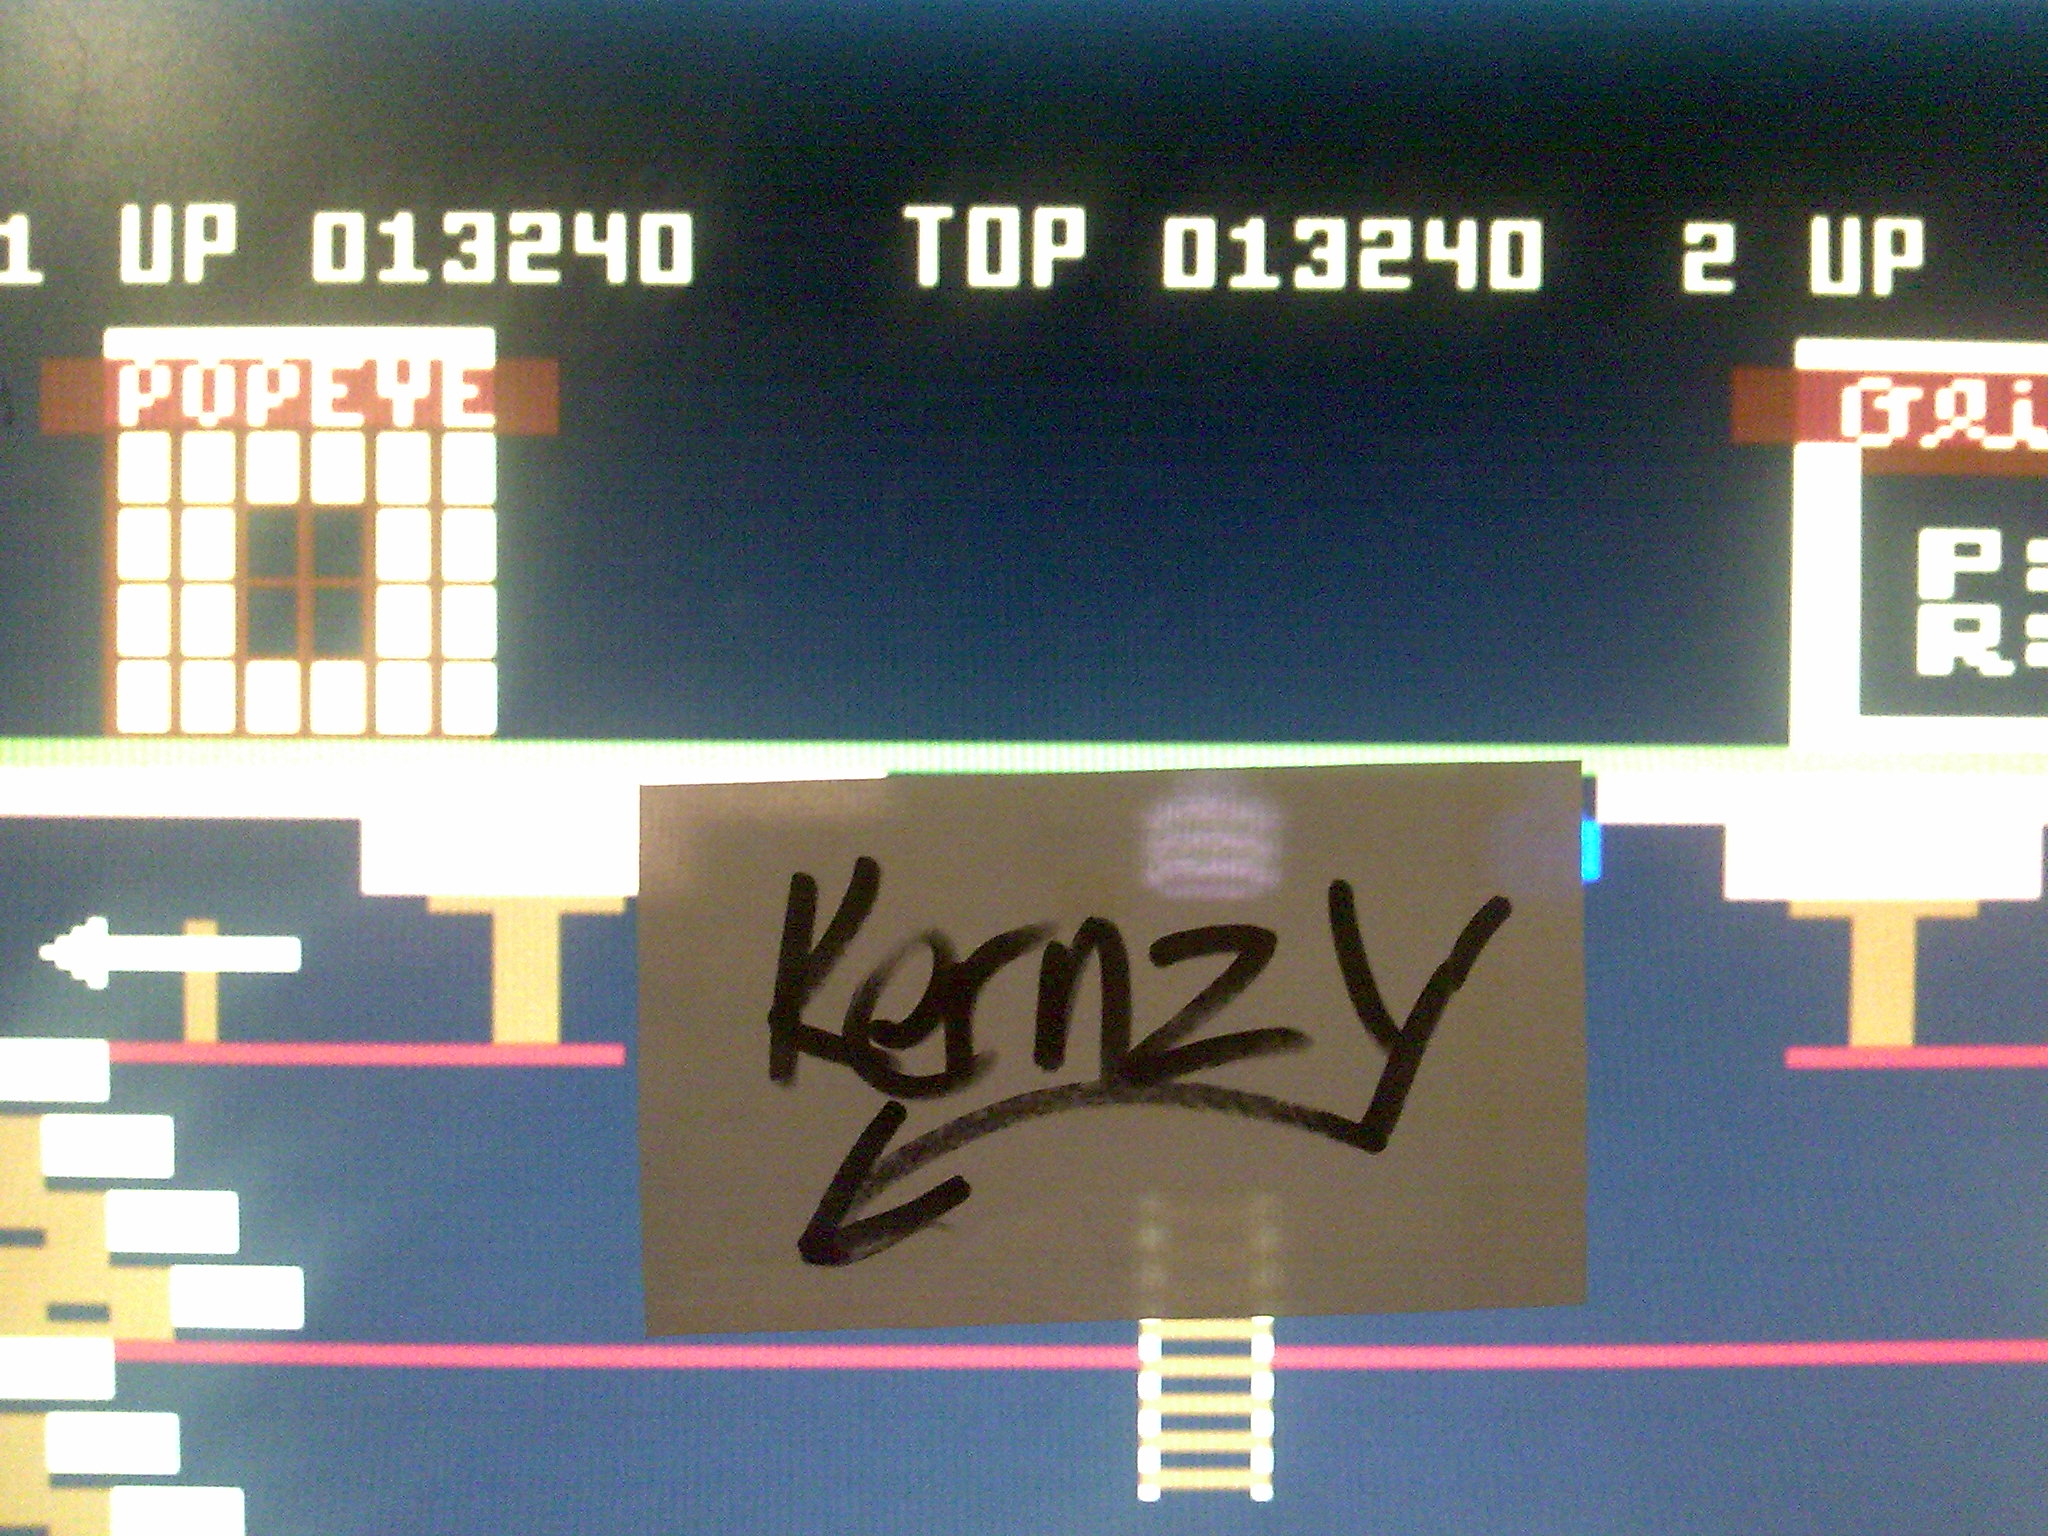 kernzy: Popeye (Atari 400/800/XL/XE Emulated) 13,240 points on 2014-11-12 05:23:34